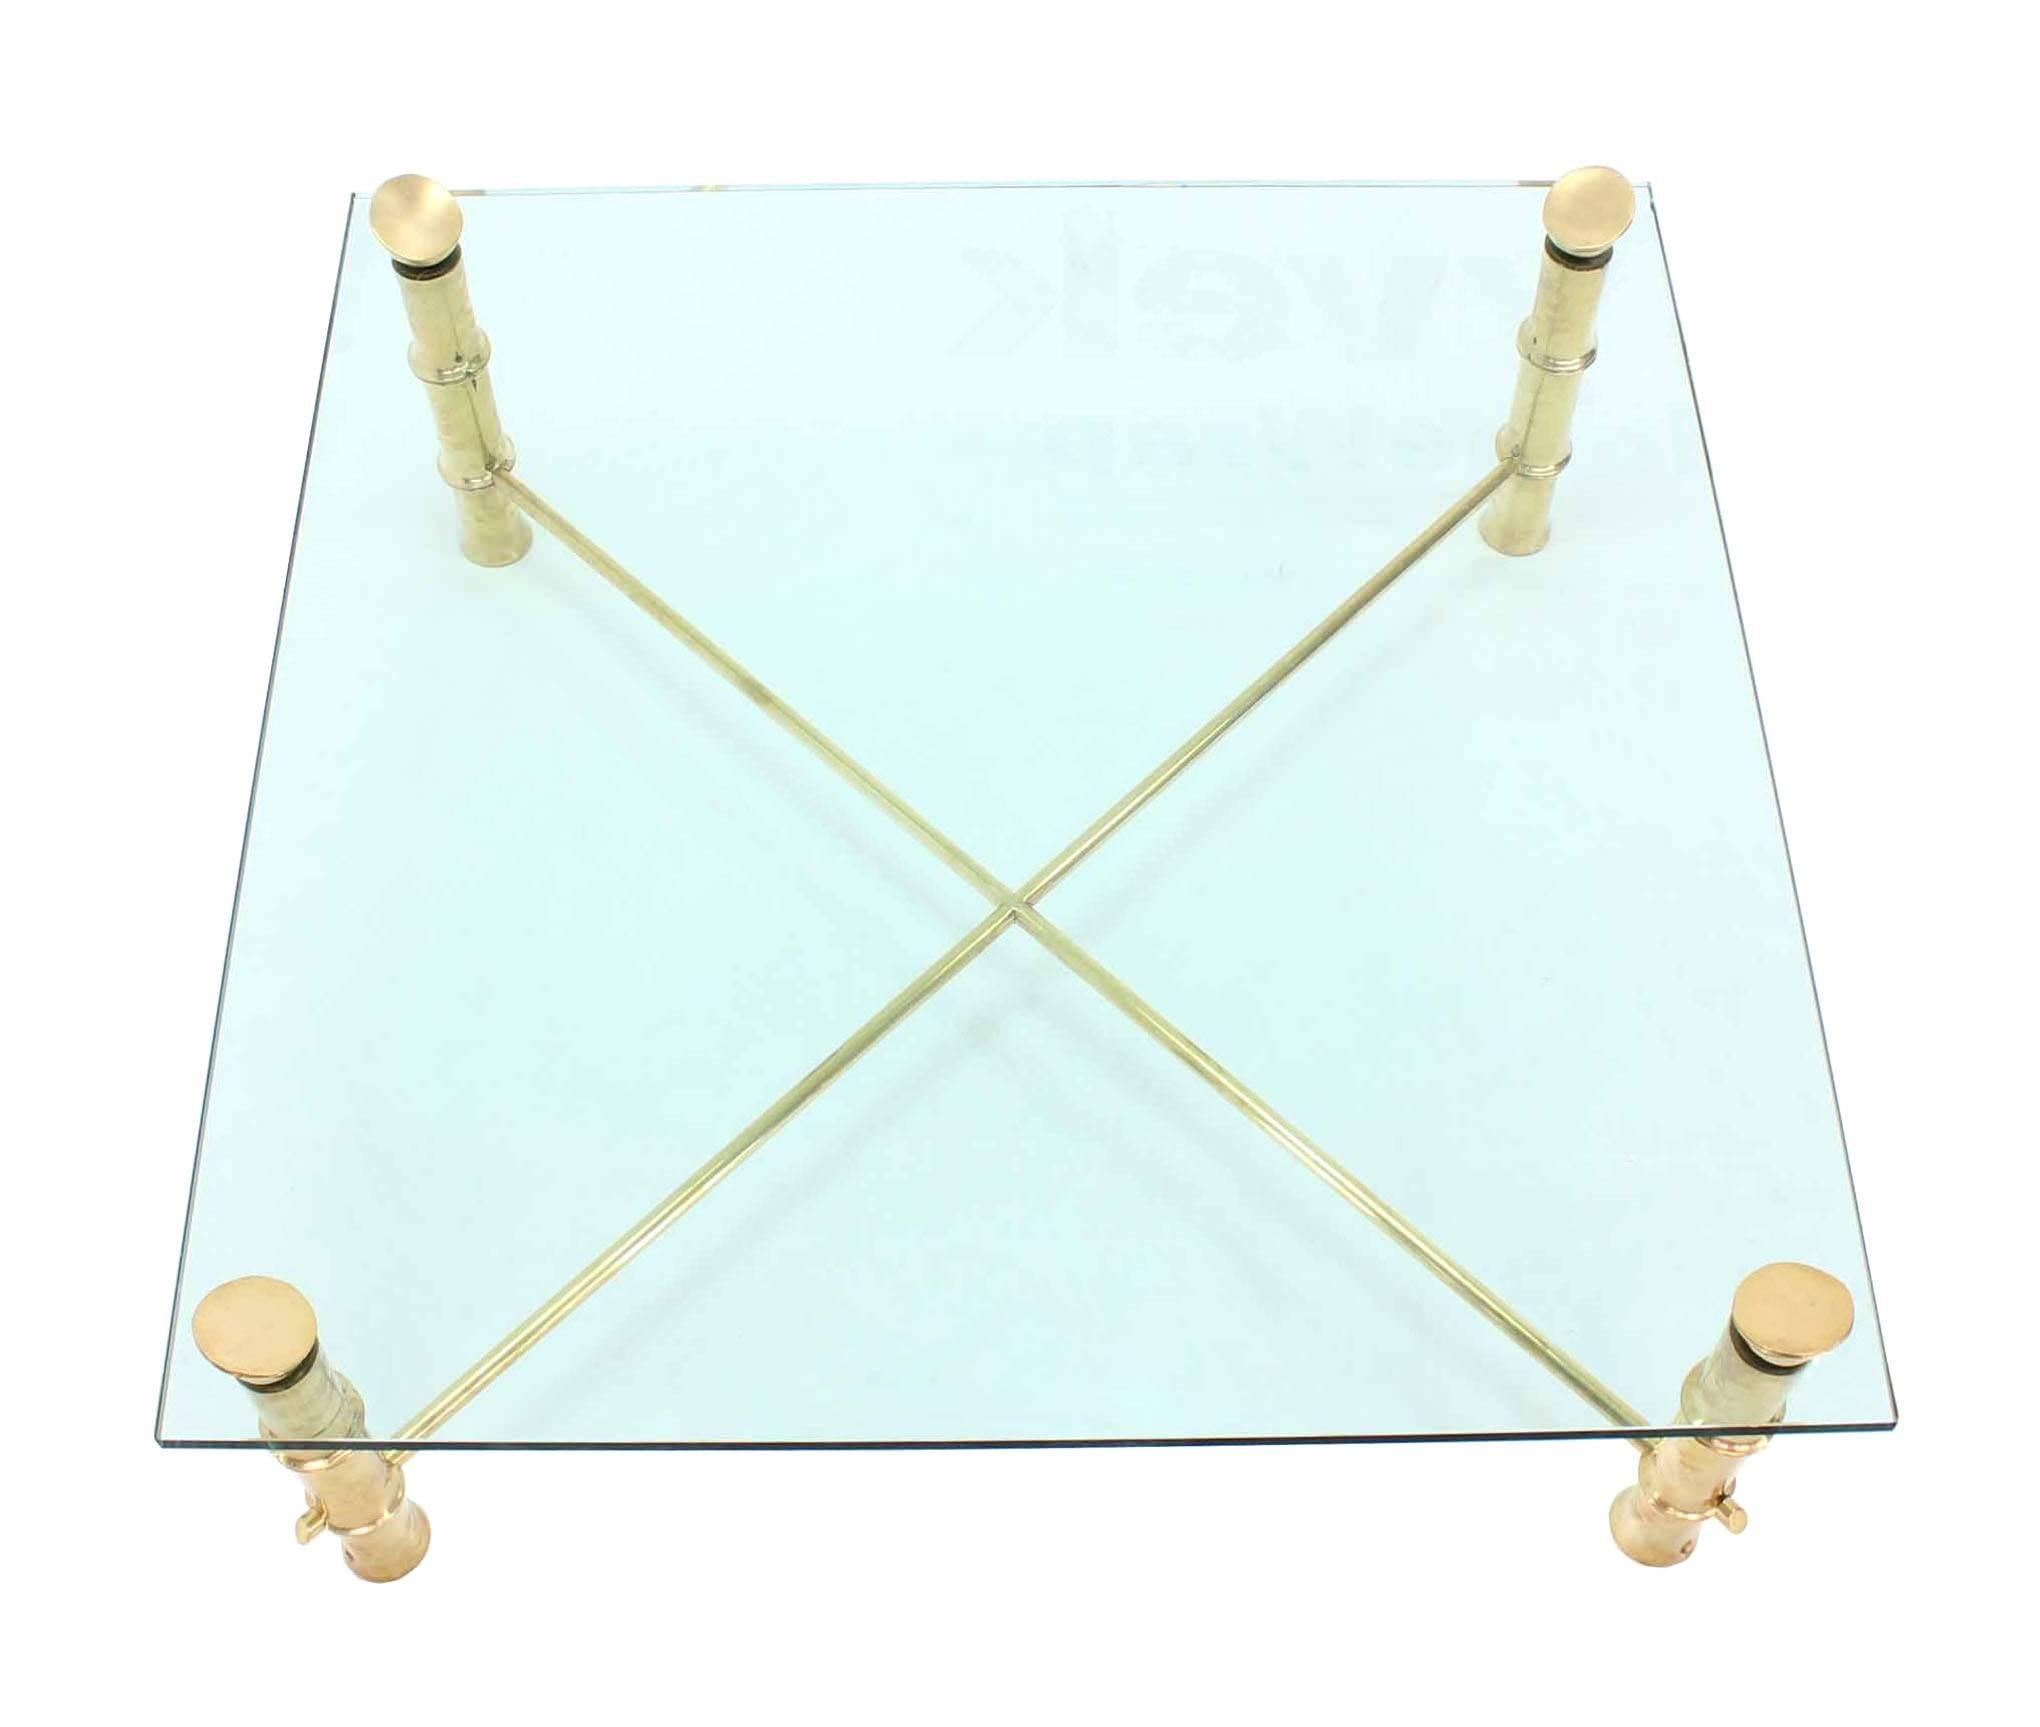 Very nice super heavy cast polished brass or bronze legs Mid-Century Modern square coffee table. Measures: 45 x 45.







In style of Maison Bagues